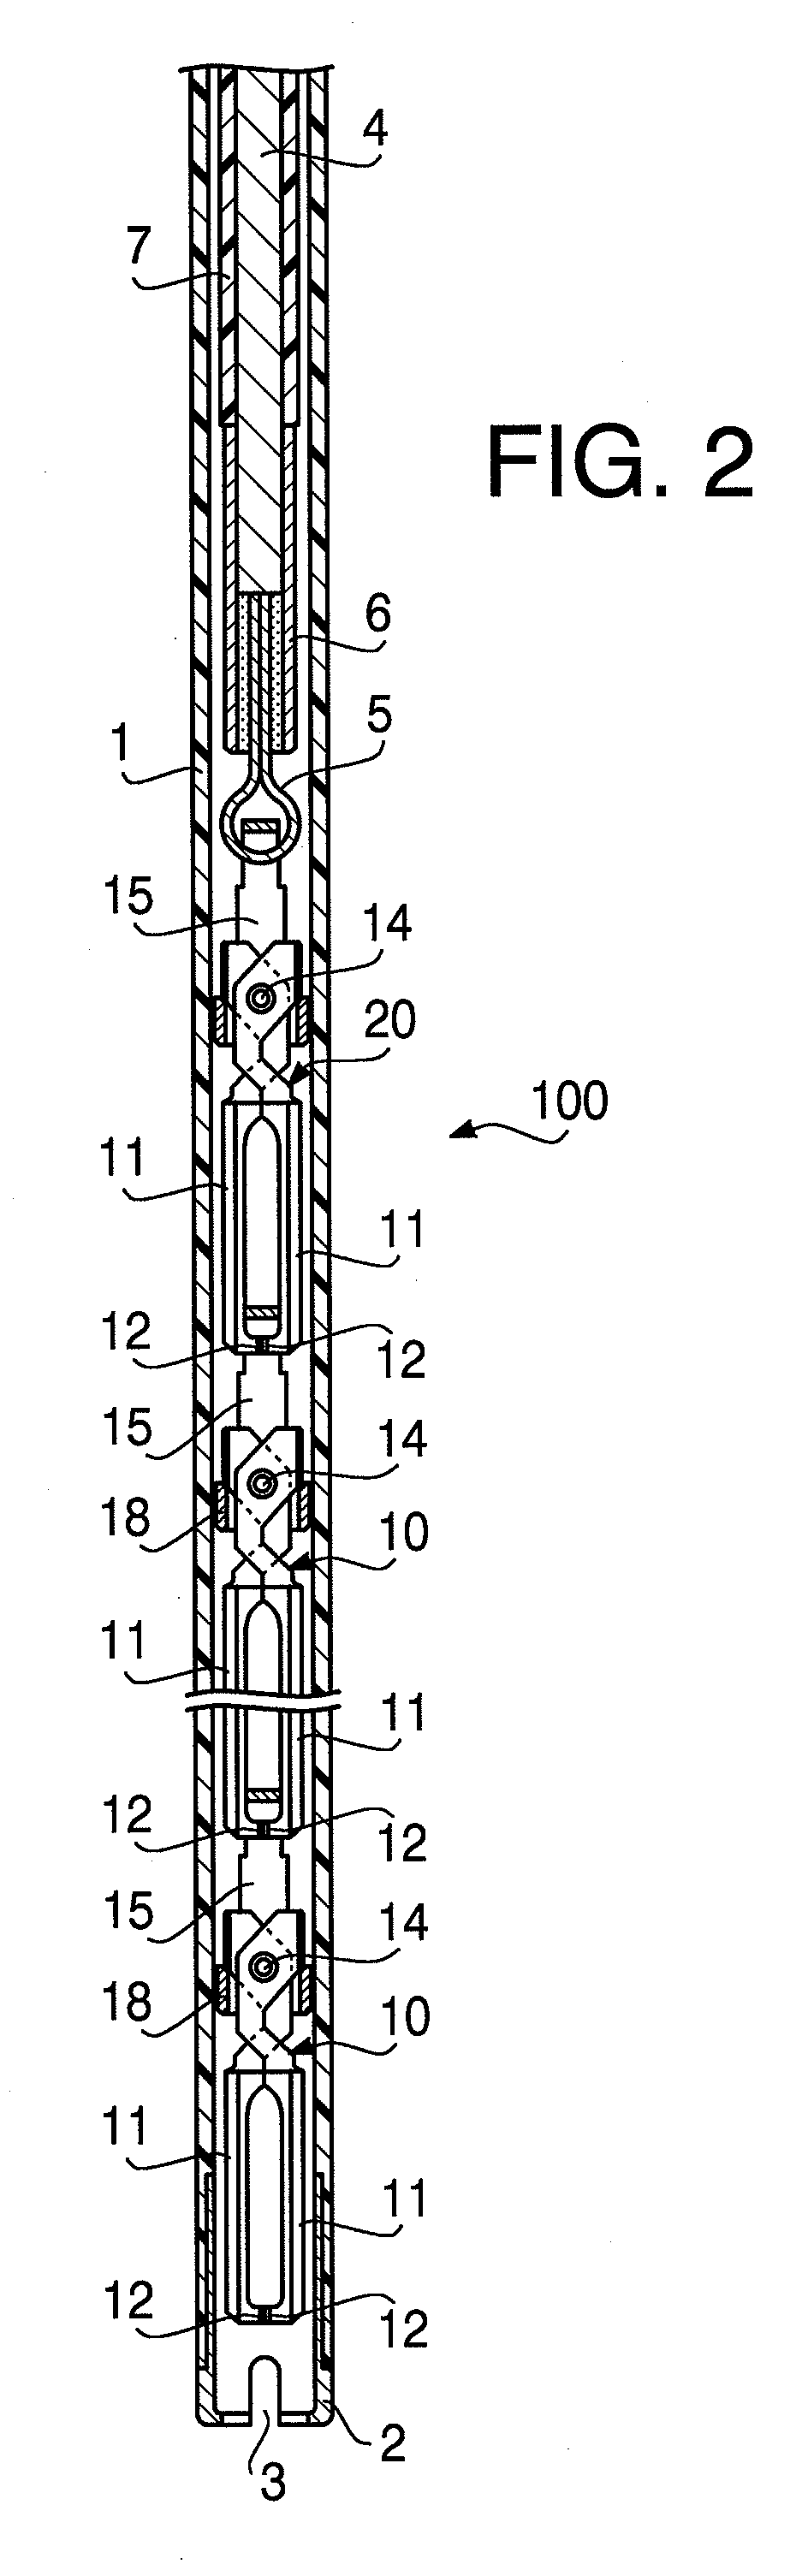 Clipping instrument for an endoscopic surgical device